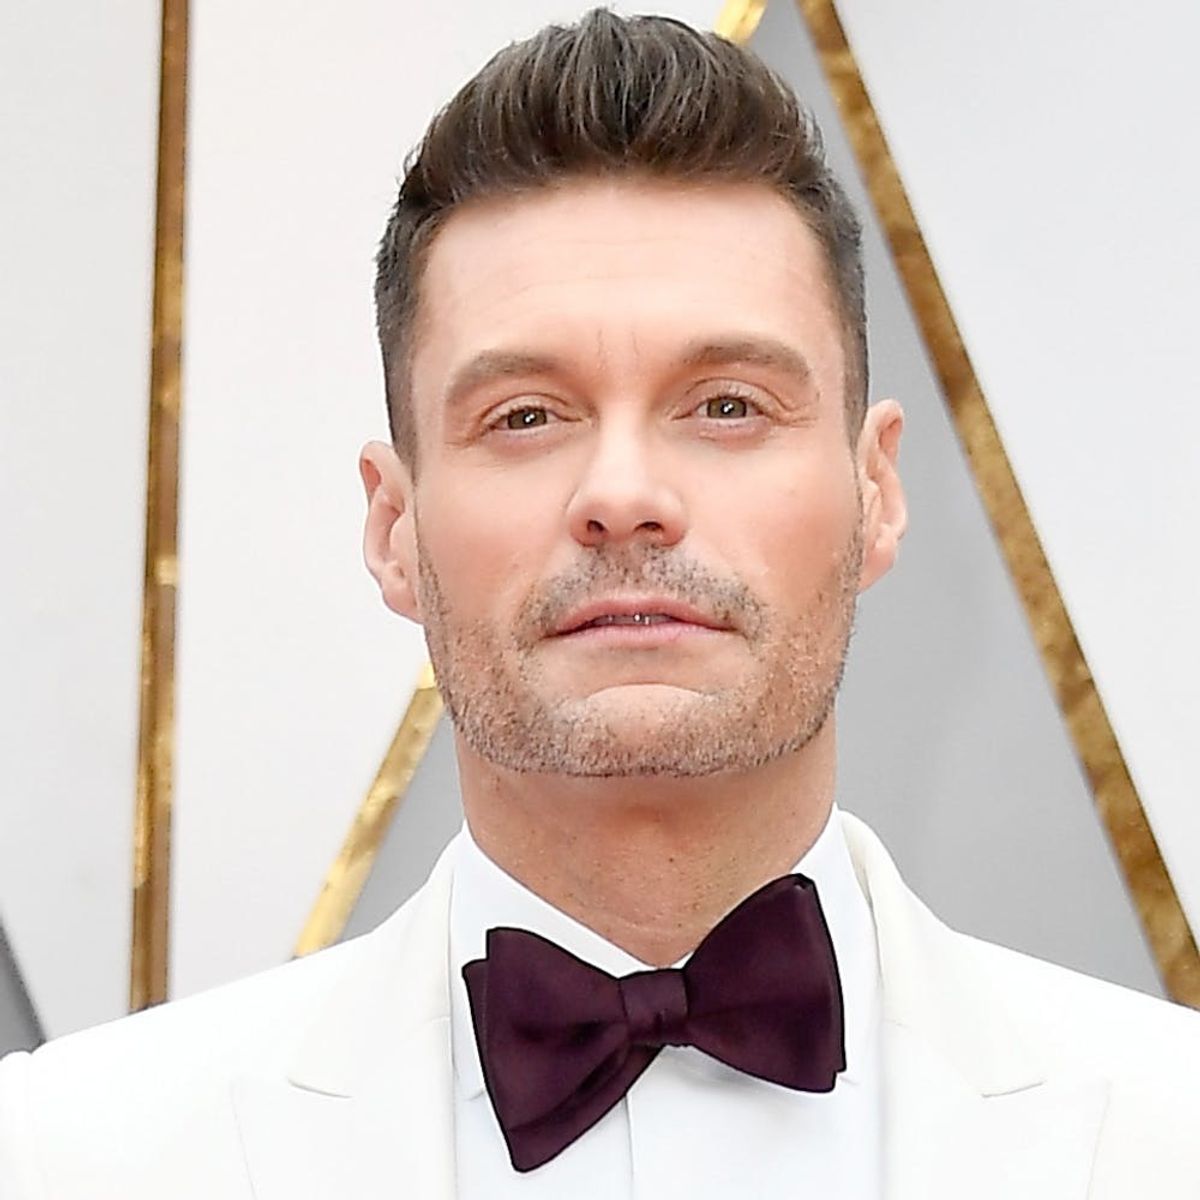 Ryan Seacrest Is Denying Allegations of Misconduct from a Former Stylist